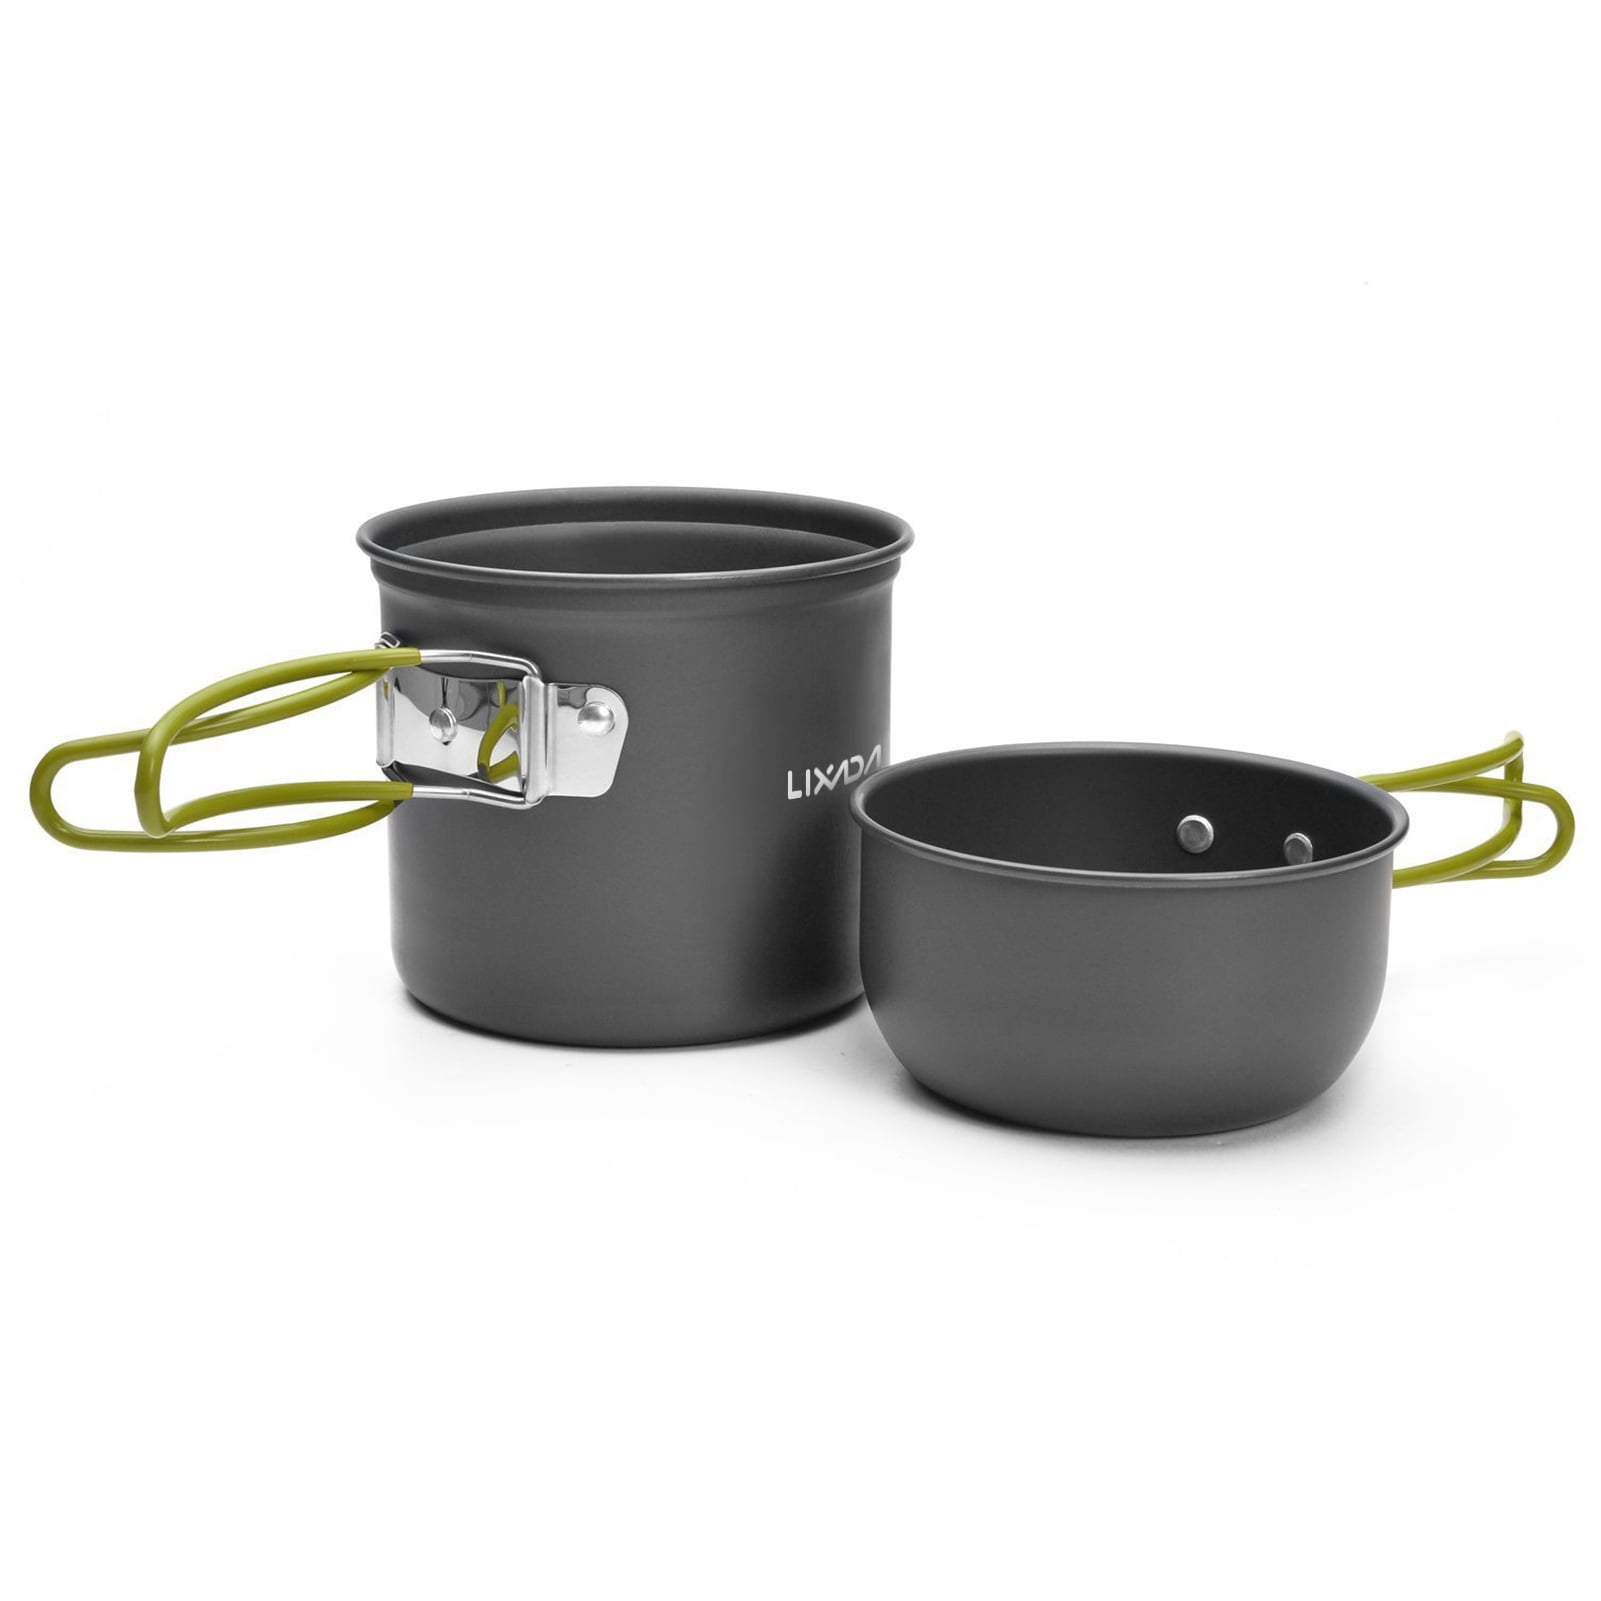 Compact Camping Cookware Set, Portable Mess Kit for Cooking